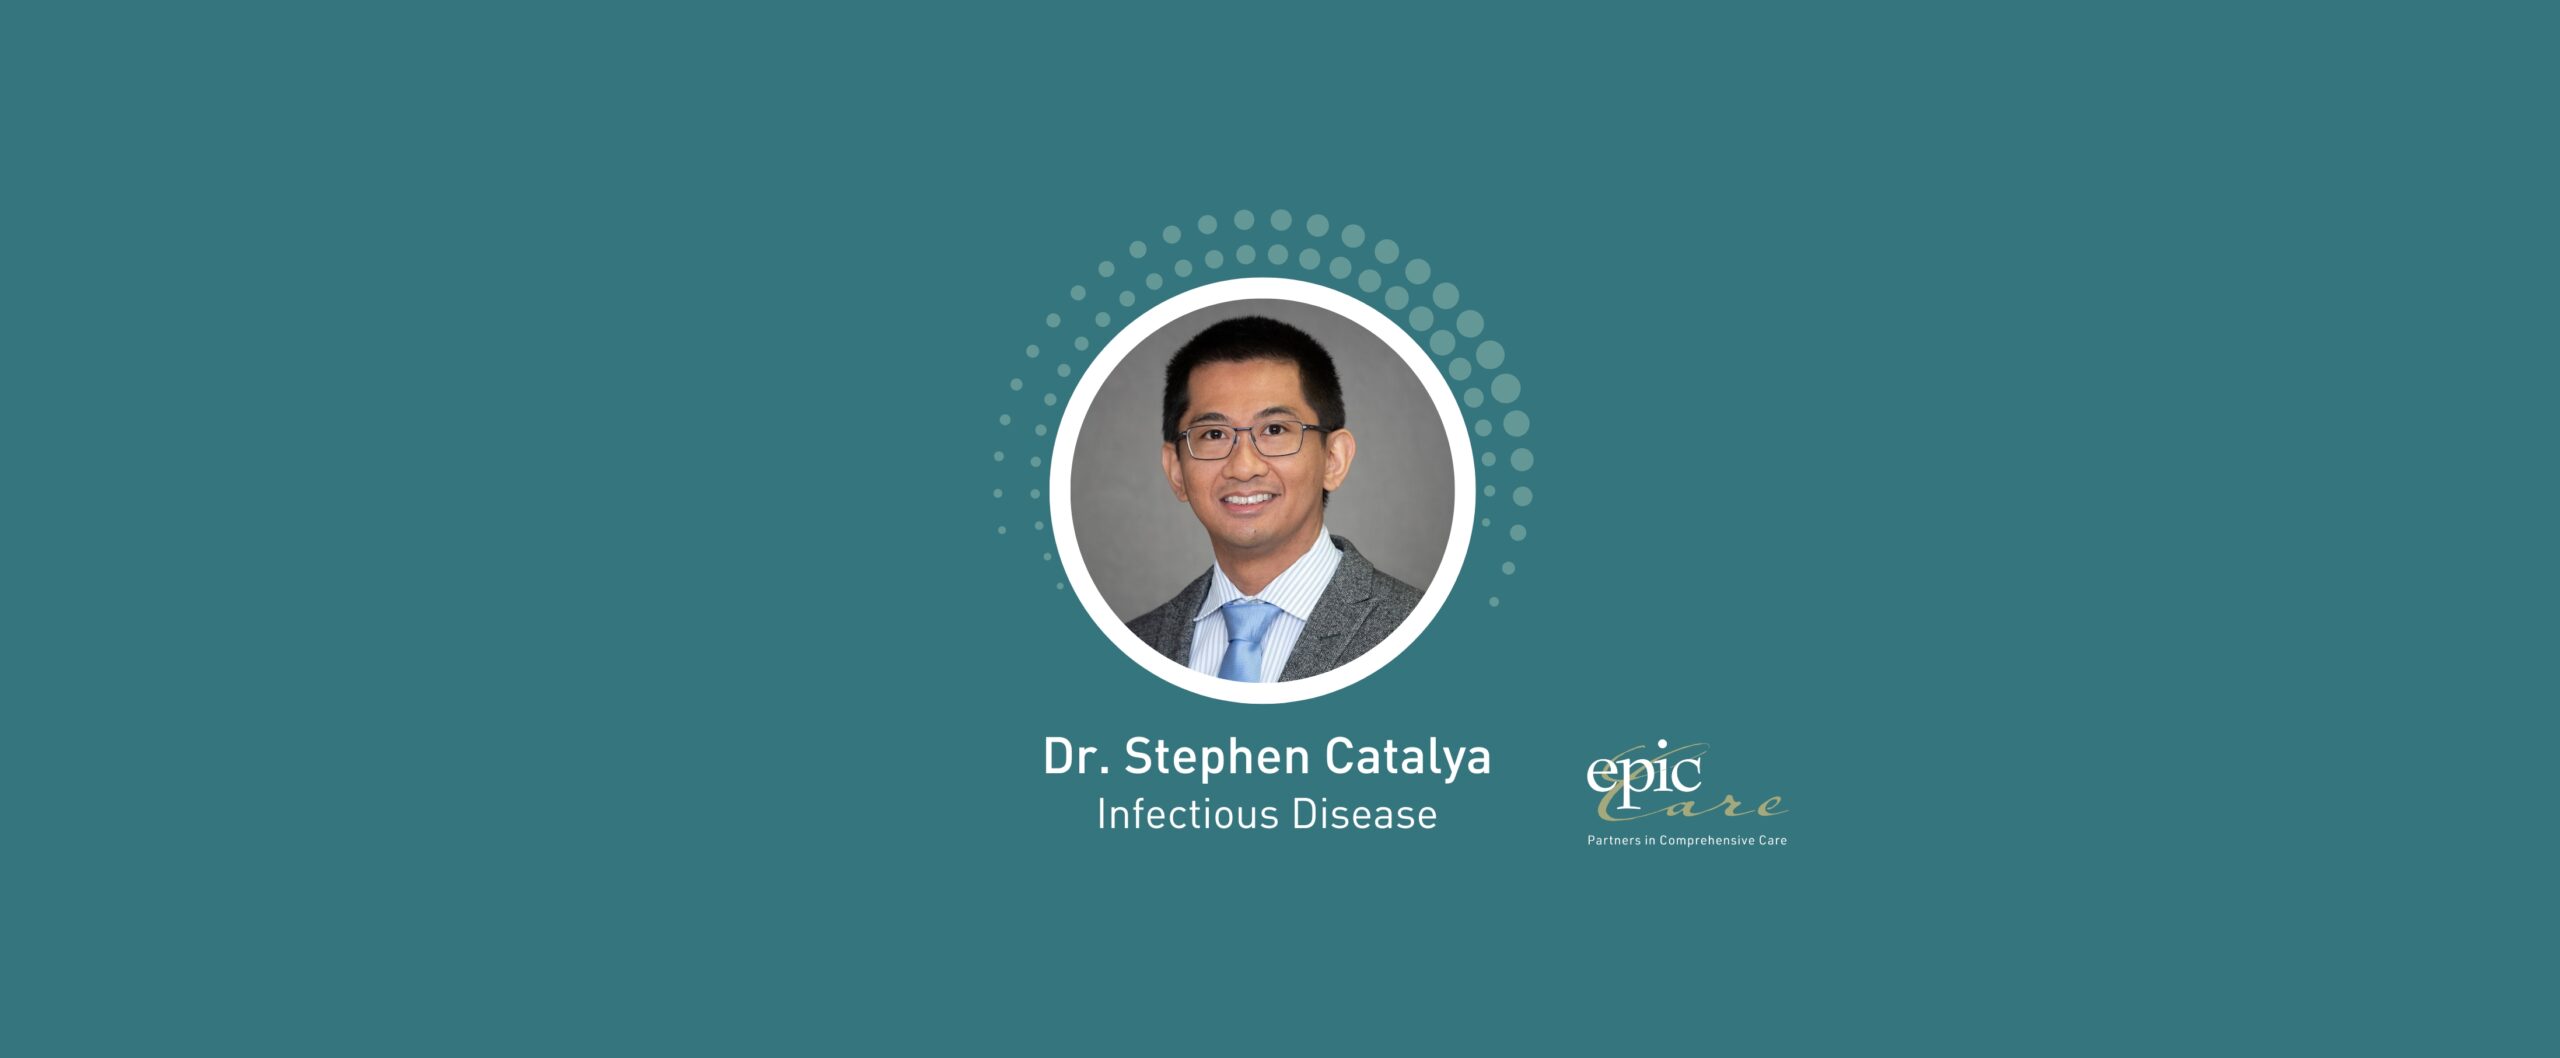 Welcome Dr. Stephen Catalya